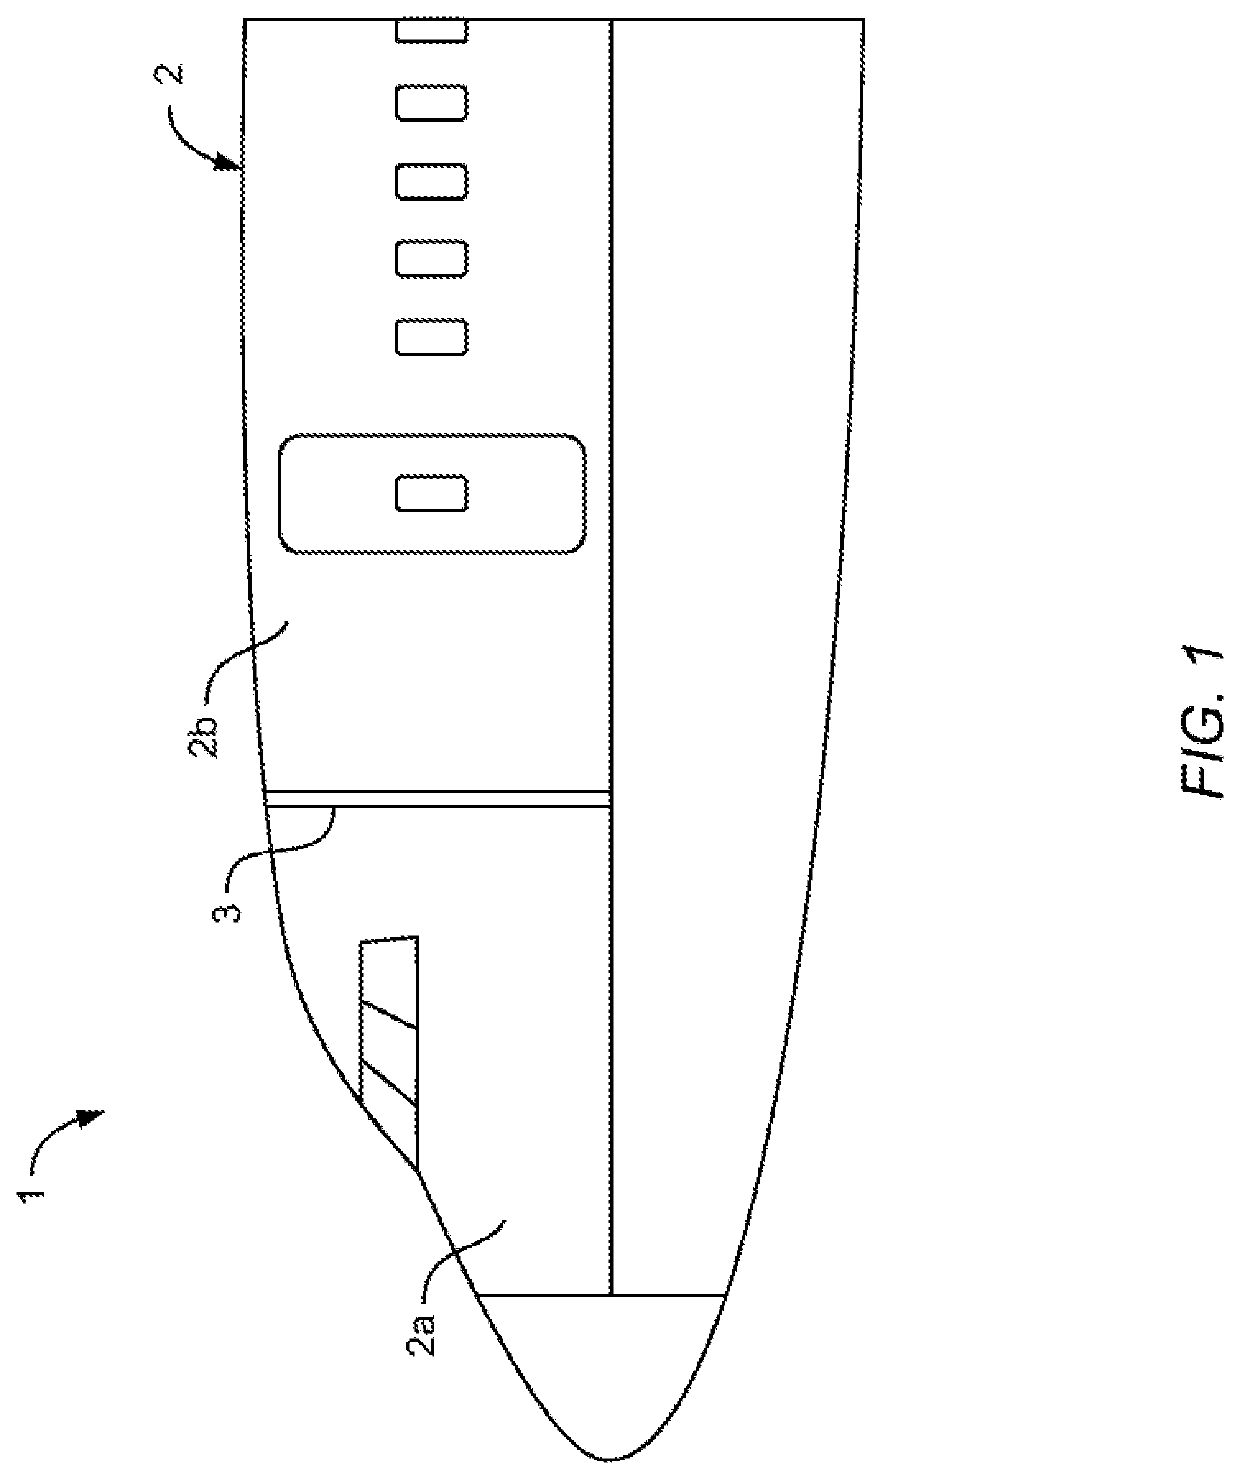 Method and apparatus for configuring screen displays